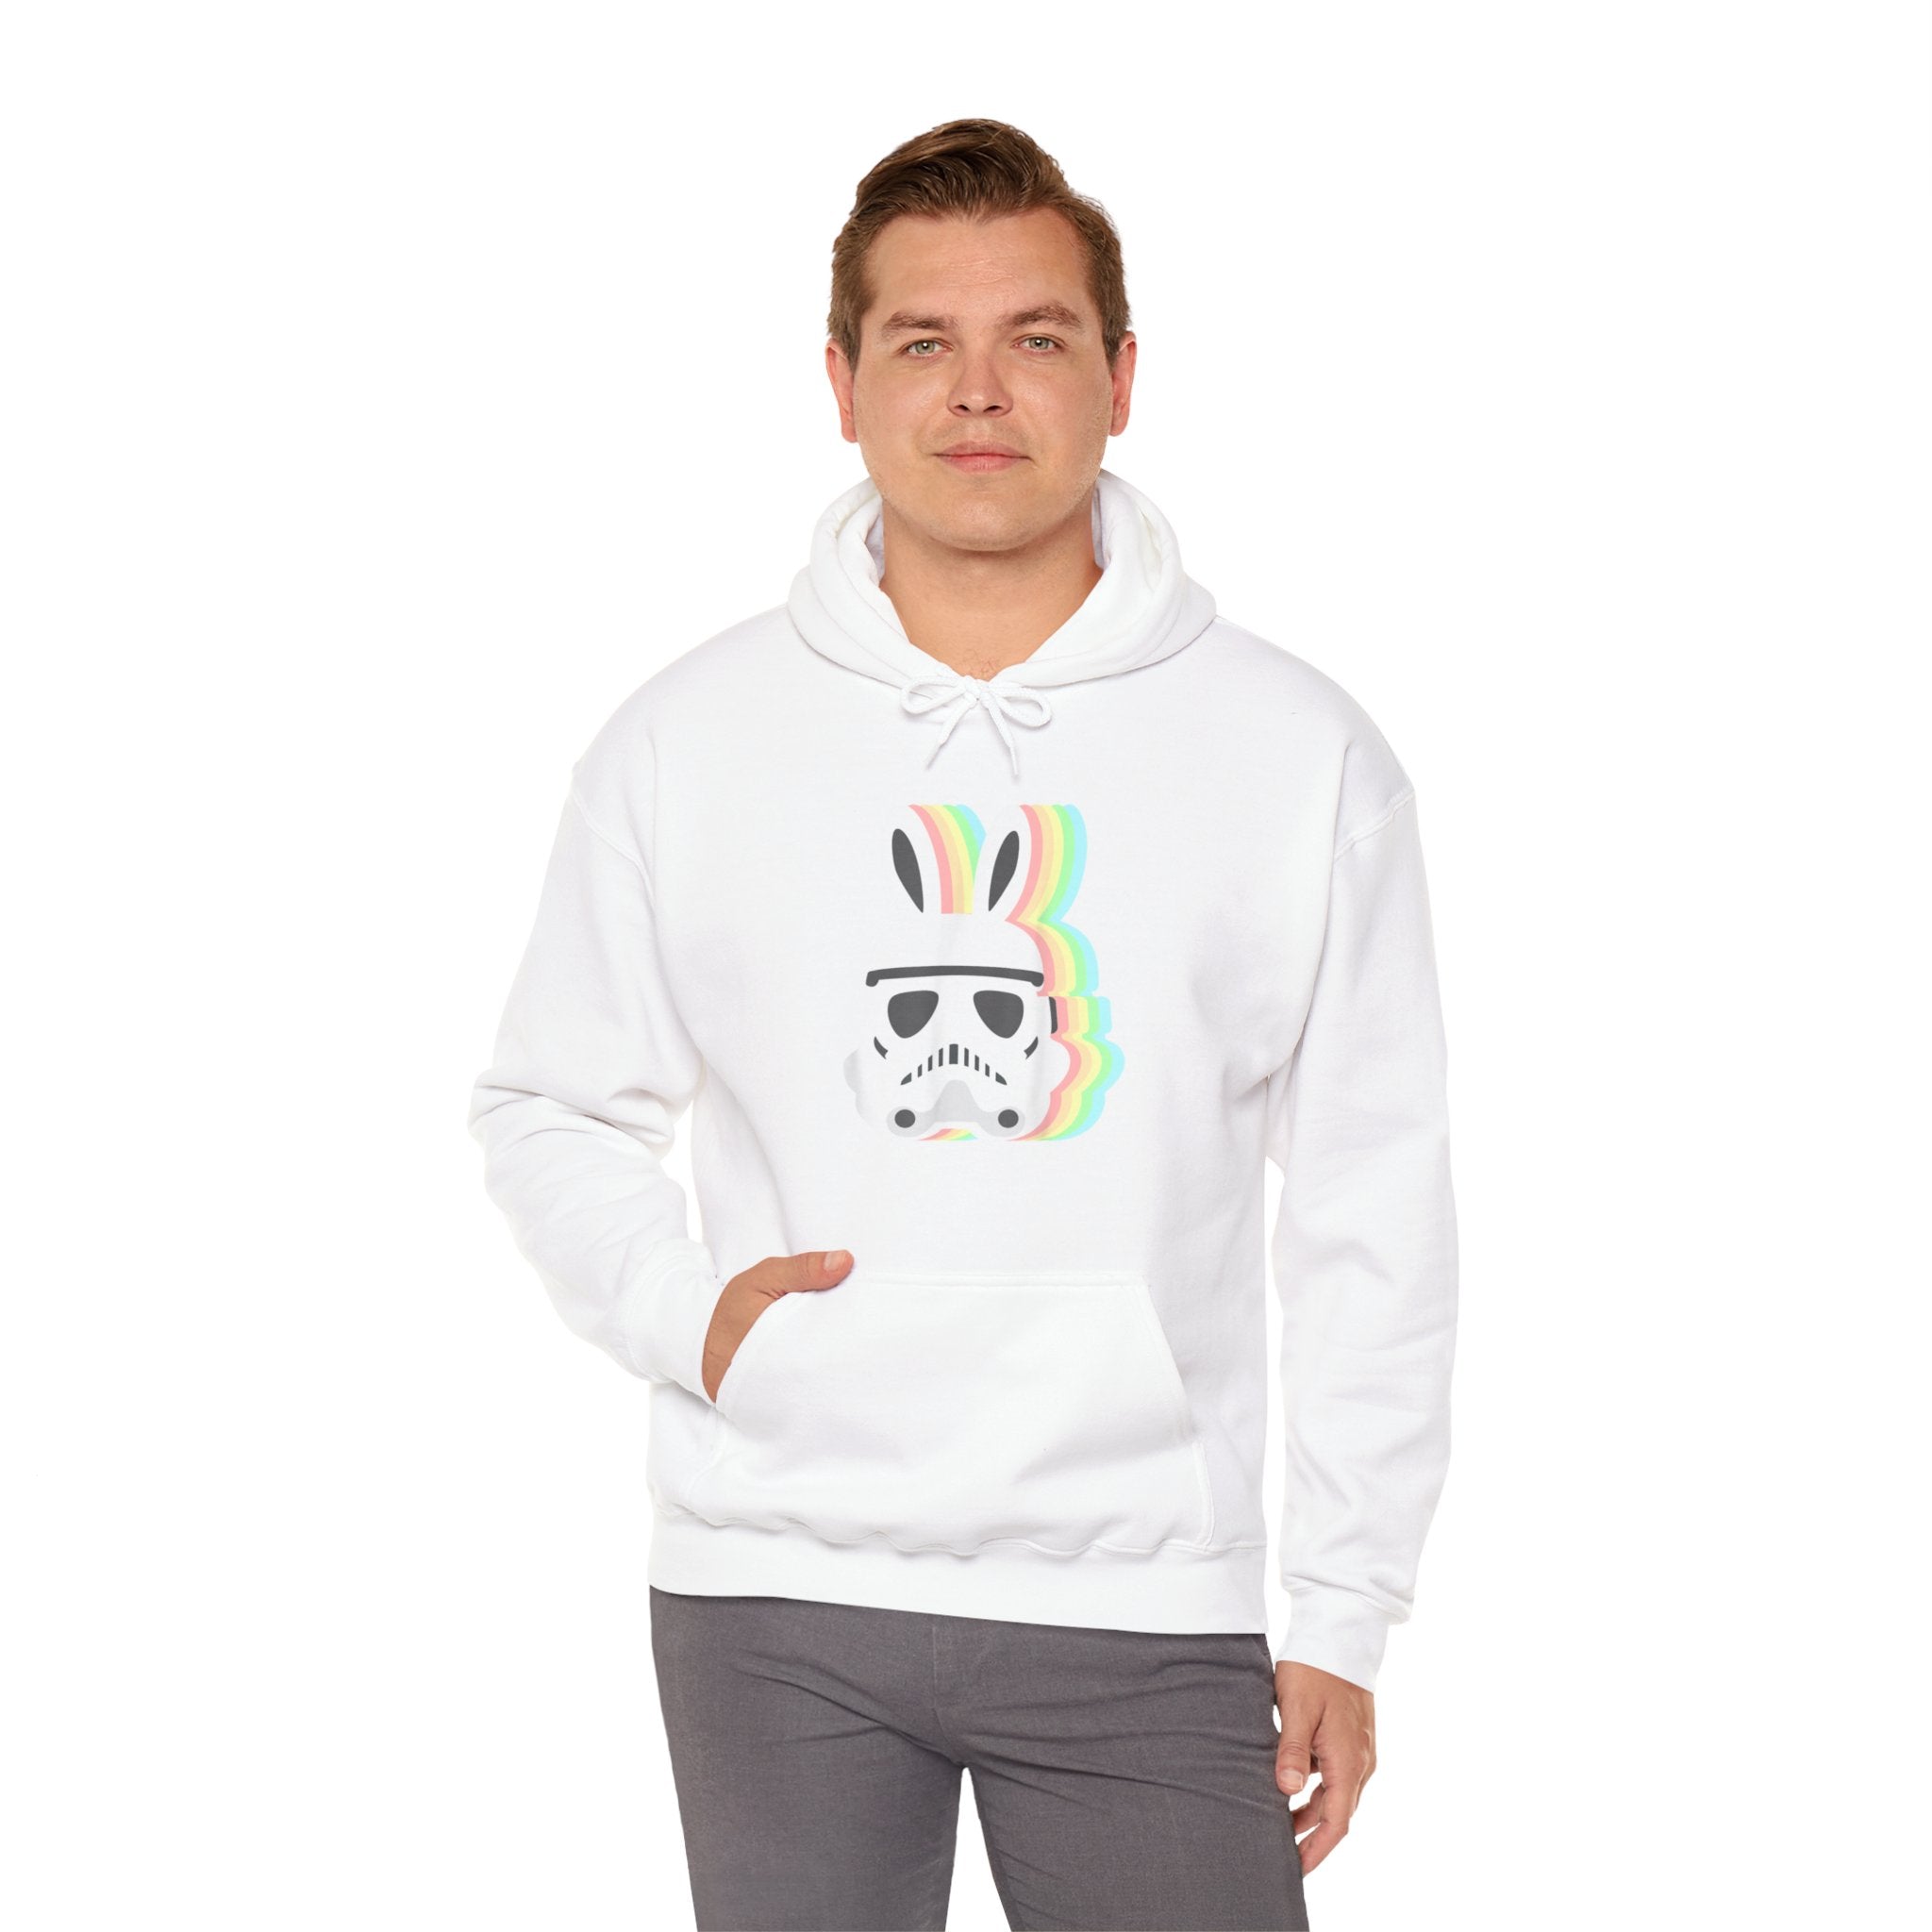 A person wearing a Star Wars Easter Stormtrooper - Hooded Sweatshirt with a graphic of an Easter Stormtrooper helmet and rainbow-colored bunny ears stands with one hand in their pocket.